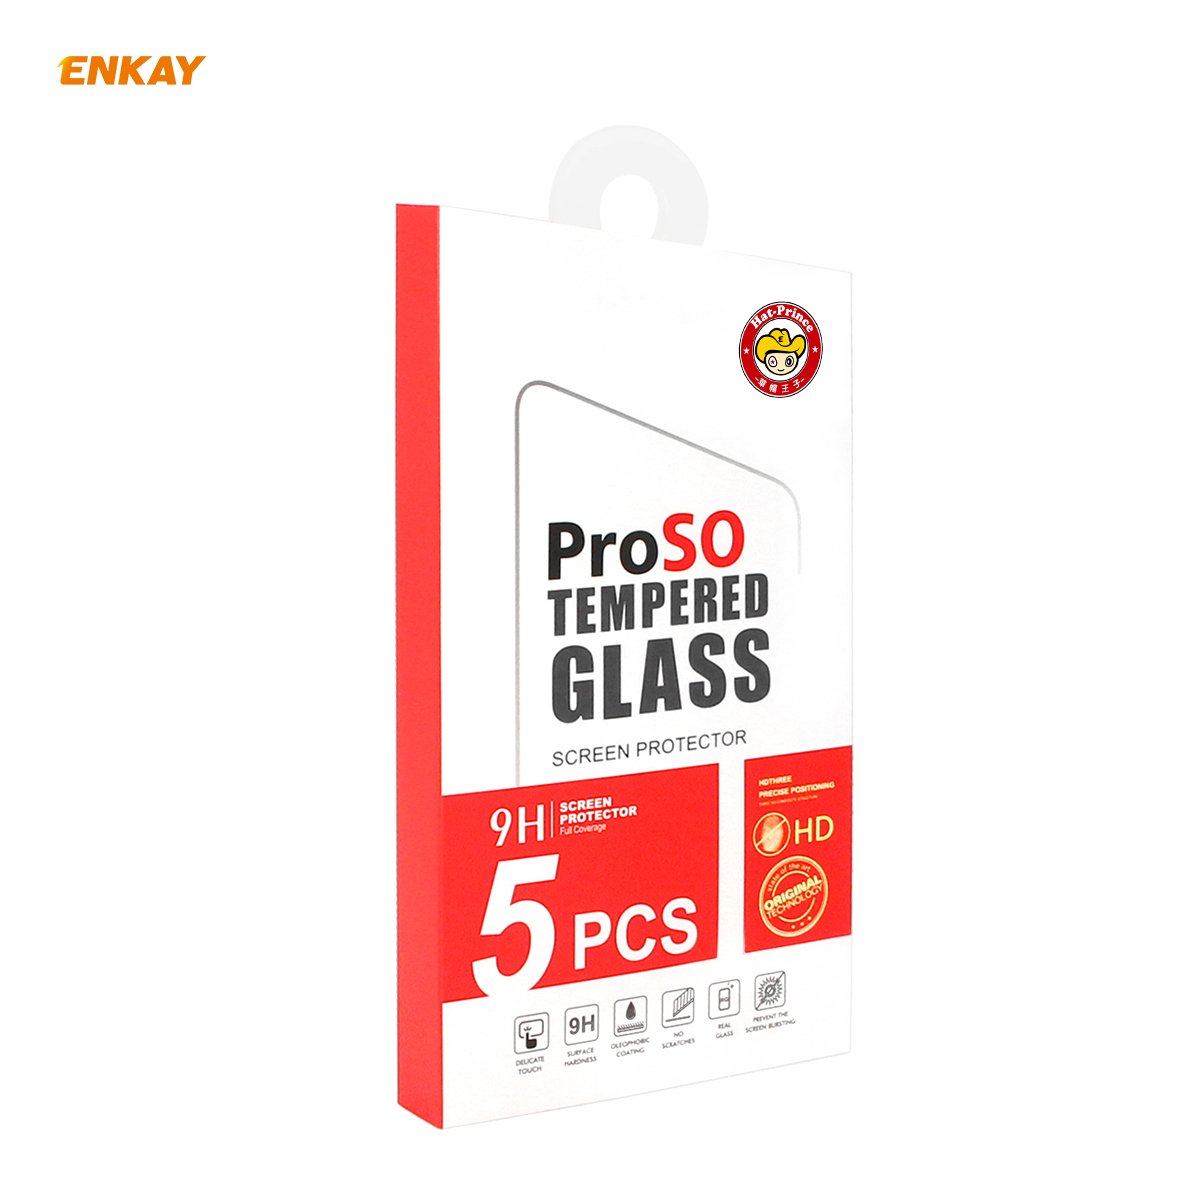 Enkay-12510Pcs-Crystal-Clear-25D-Curved-Edge-9H-Anti-Explosion-Anti-Scratch-Tempered-Glass-Screen-Pr-1756165-11